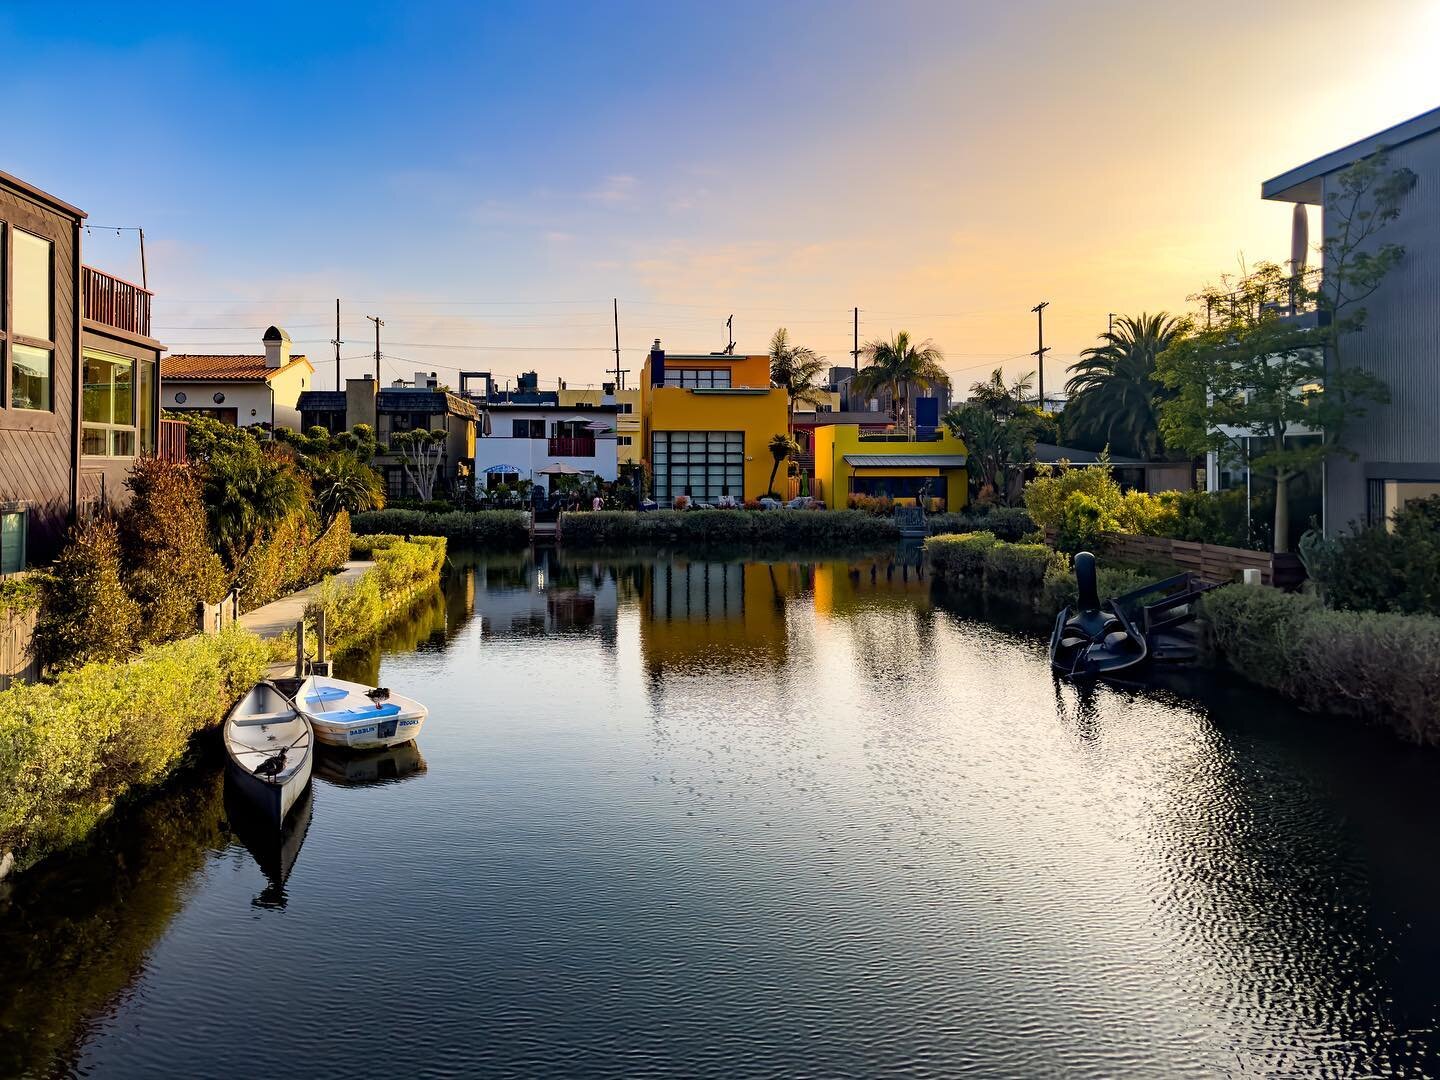 Unveiling LA's hidden secret: The Venice Canals were almost filled in during the 1920s to make way for cars.
Thankfully, this unique LA charm was preserved for us to enjoy today!

Did you know the Venice Canals in Los Angeles were designed to mirror 